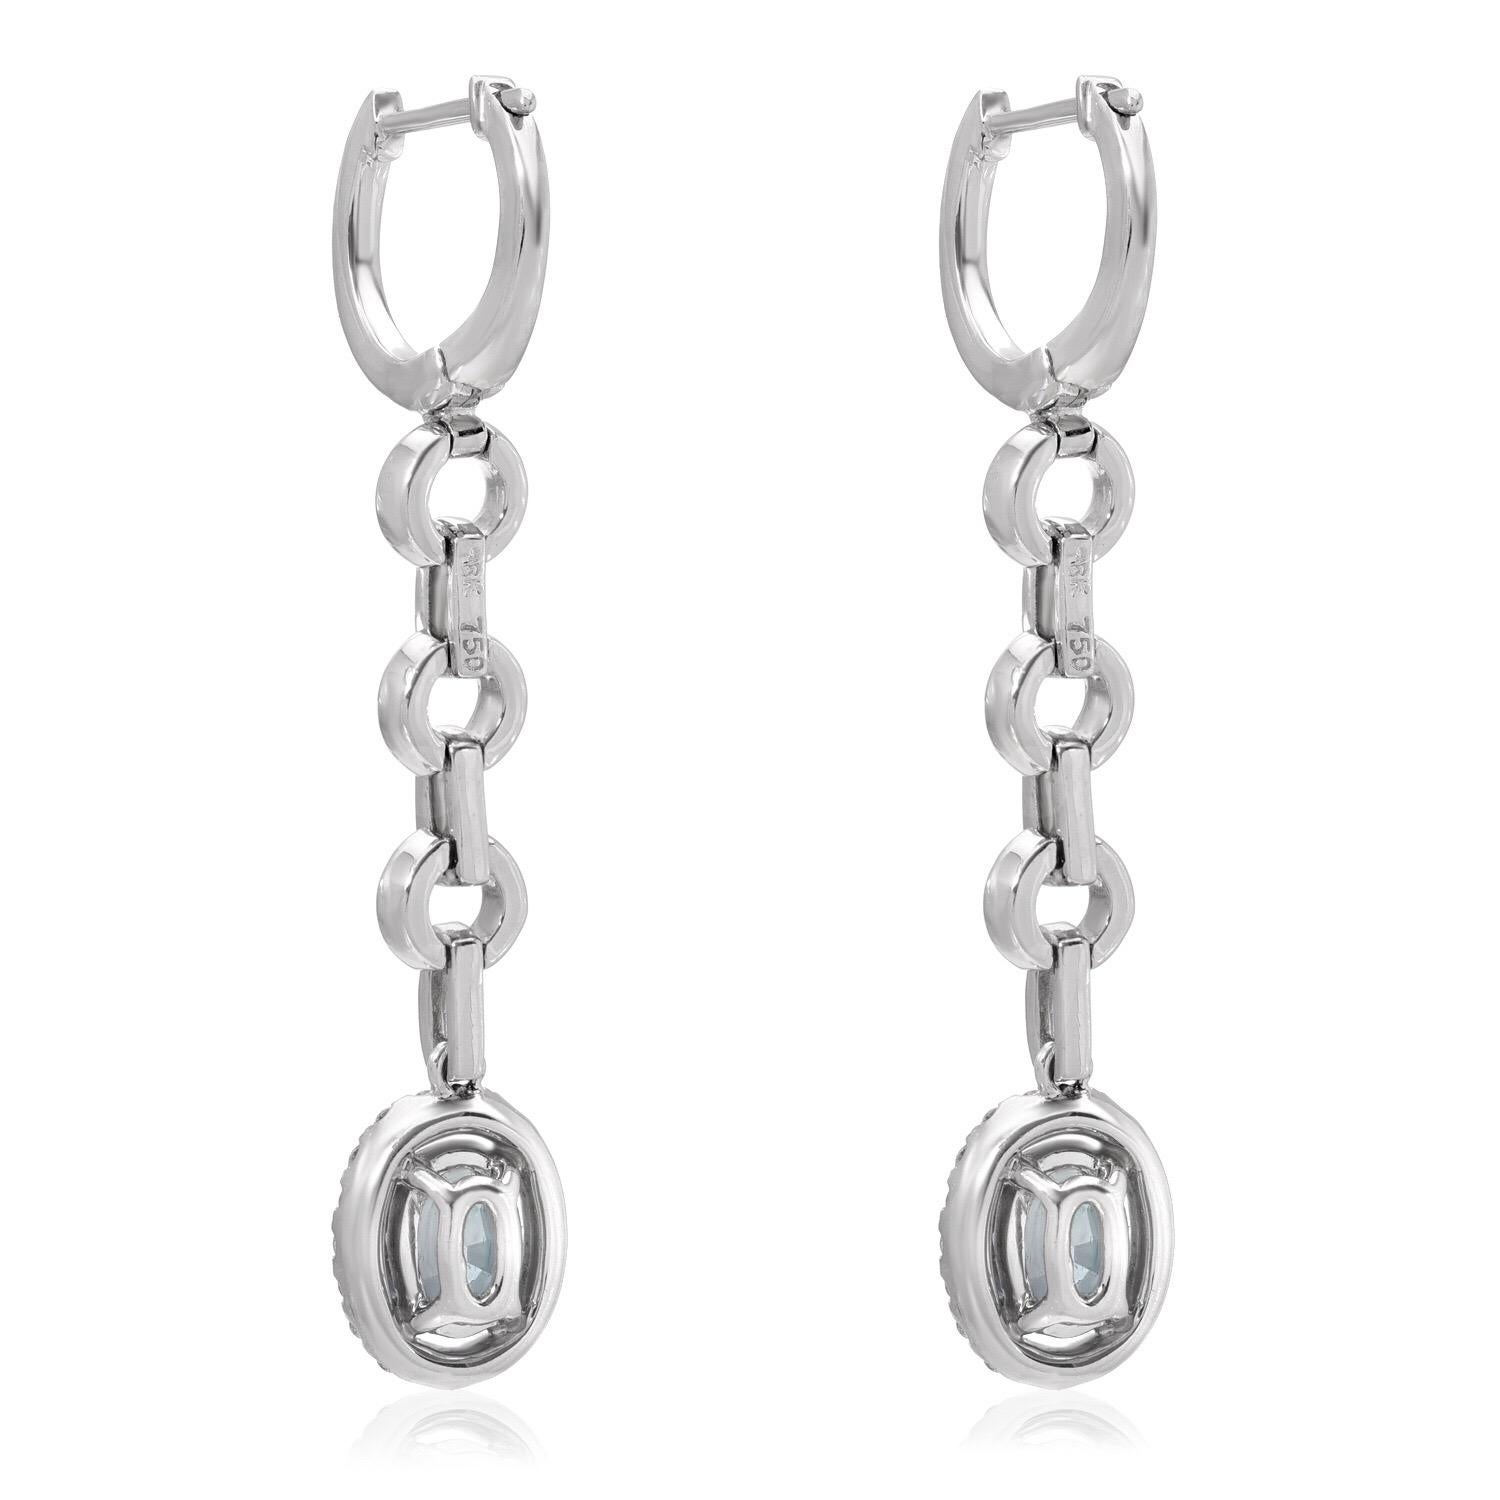 Rare pair of oval Alexandrites, weighing a total of 1.12 carats, are surrounded by a total of 0.45 carats of round brilliant diamonds, in these lever back, drop, 18K white gold diamond earrings, for women.

GIA certificates are attached to the